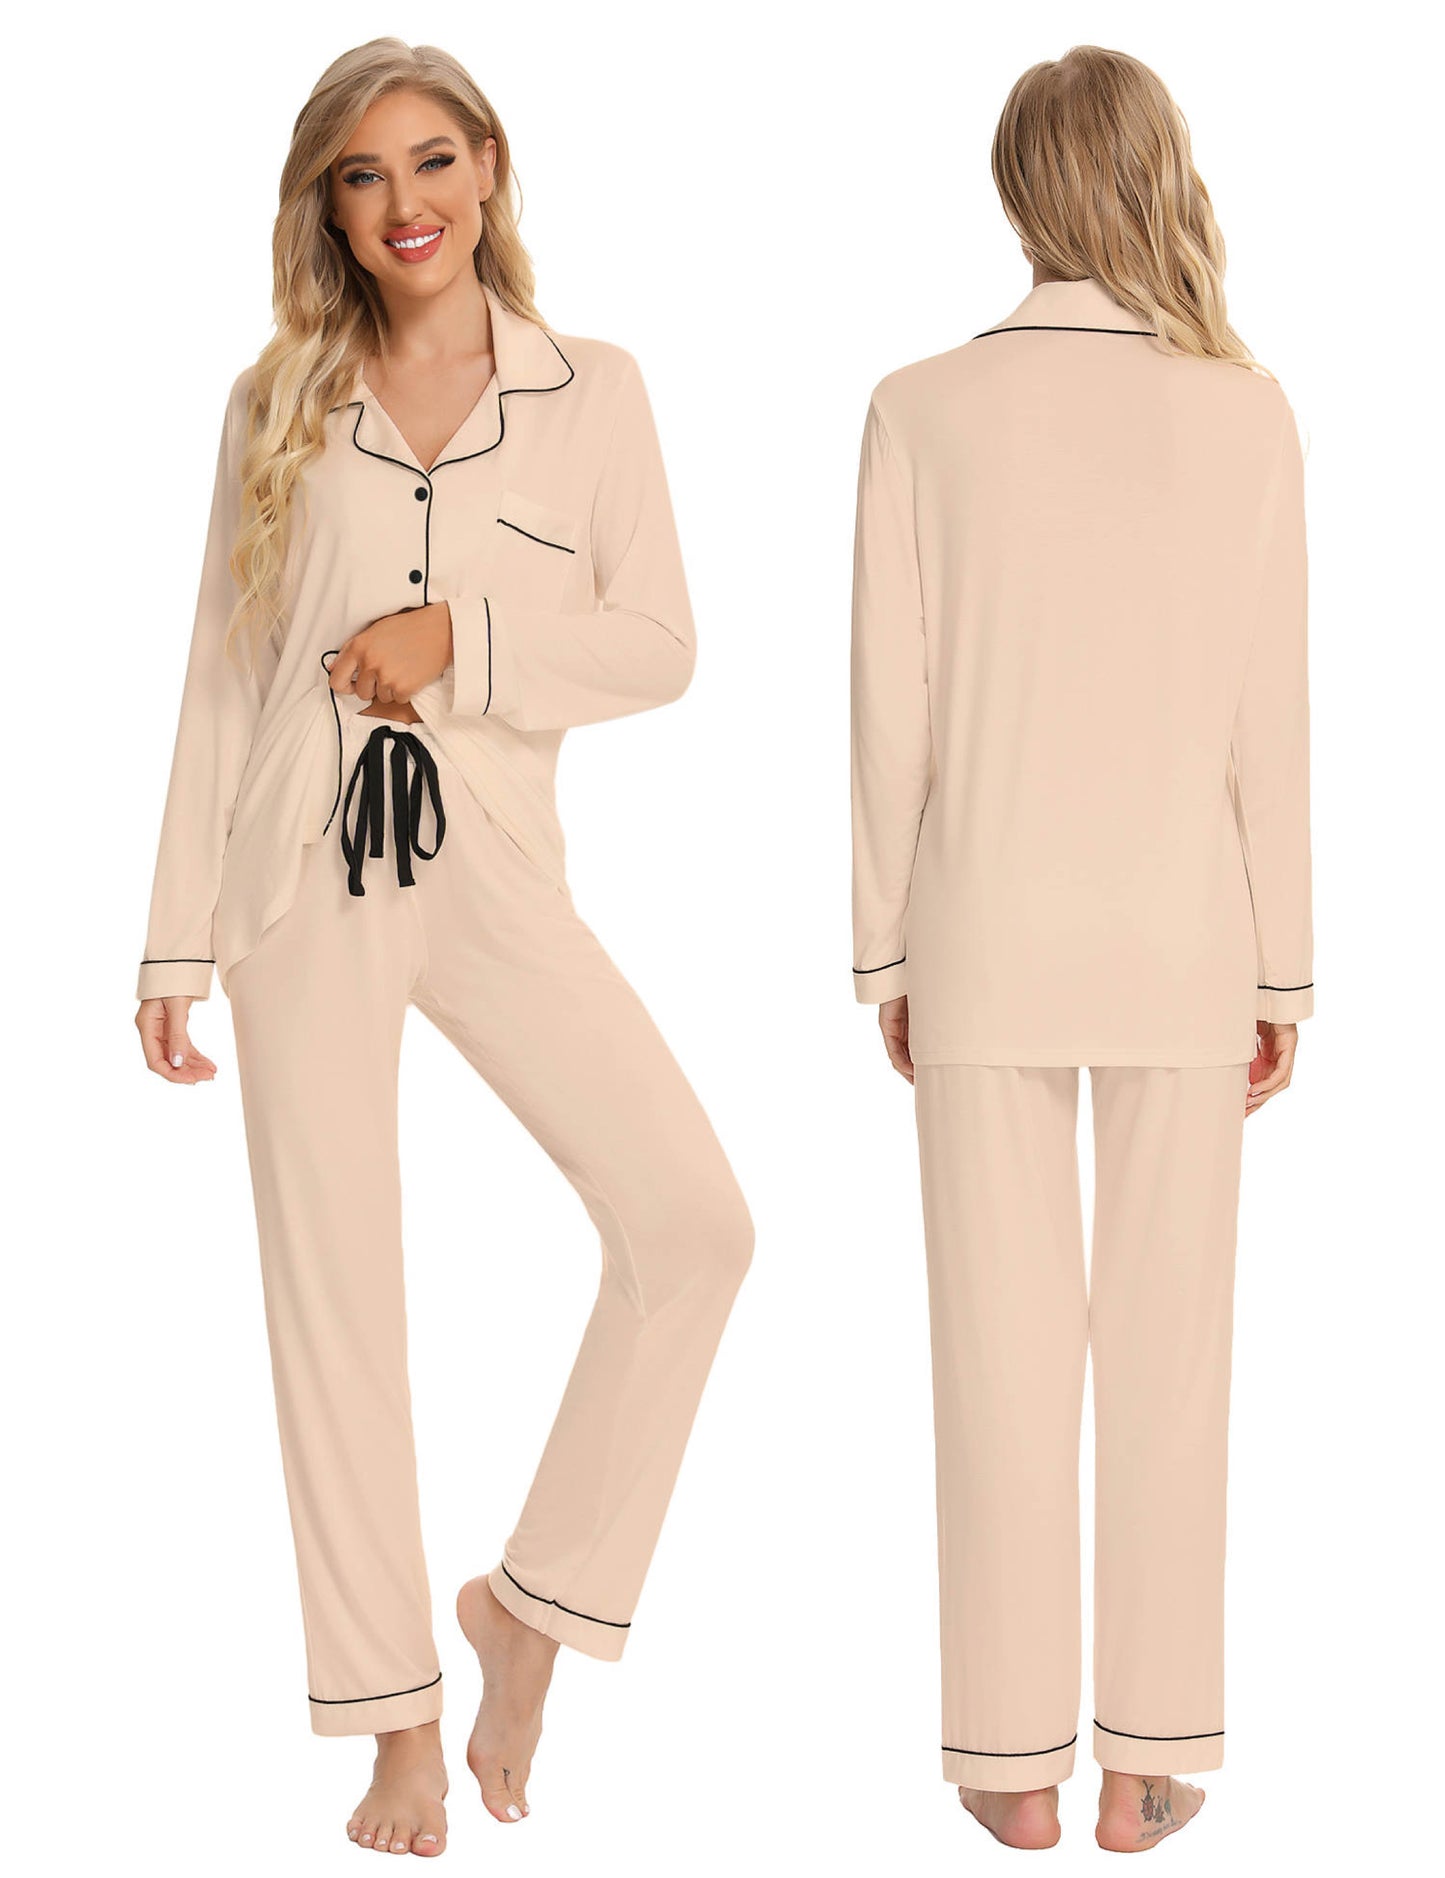 Long Sleeve Buttoned Bamboo PJ's Set - Nude